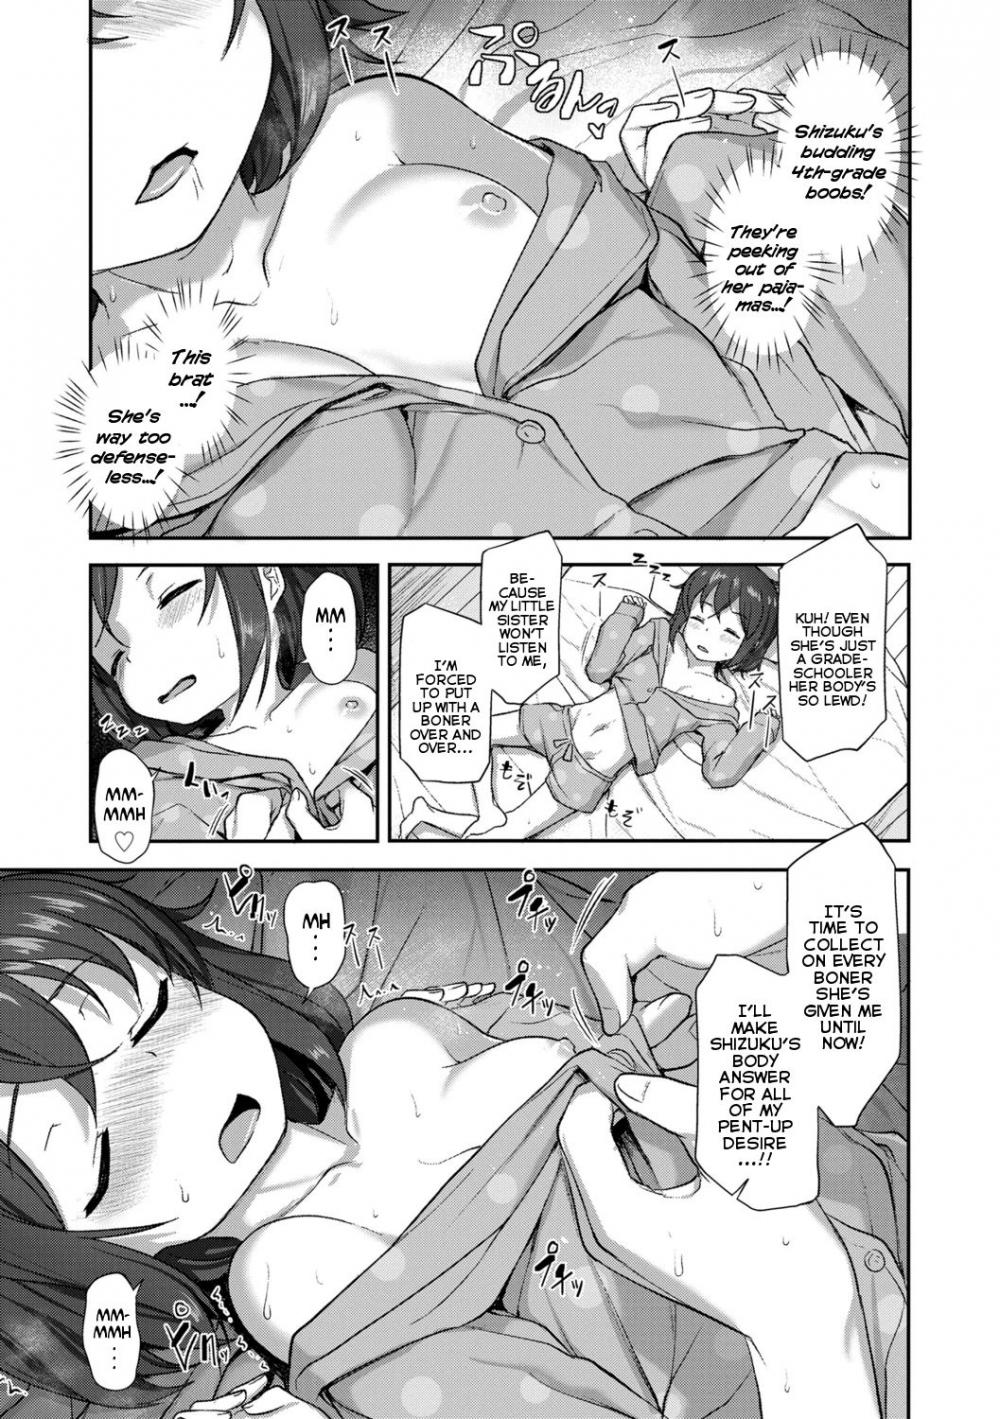 Hentai Manga Comic-What Kind of Weirdo Onii-chan Gets Excited From Seeing His Little Sister Naked?-Chapter 8-3